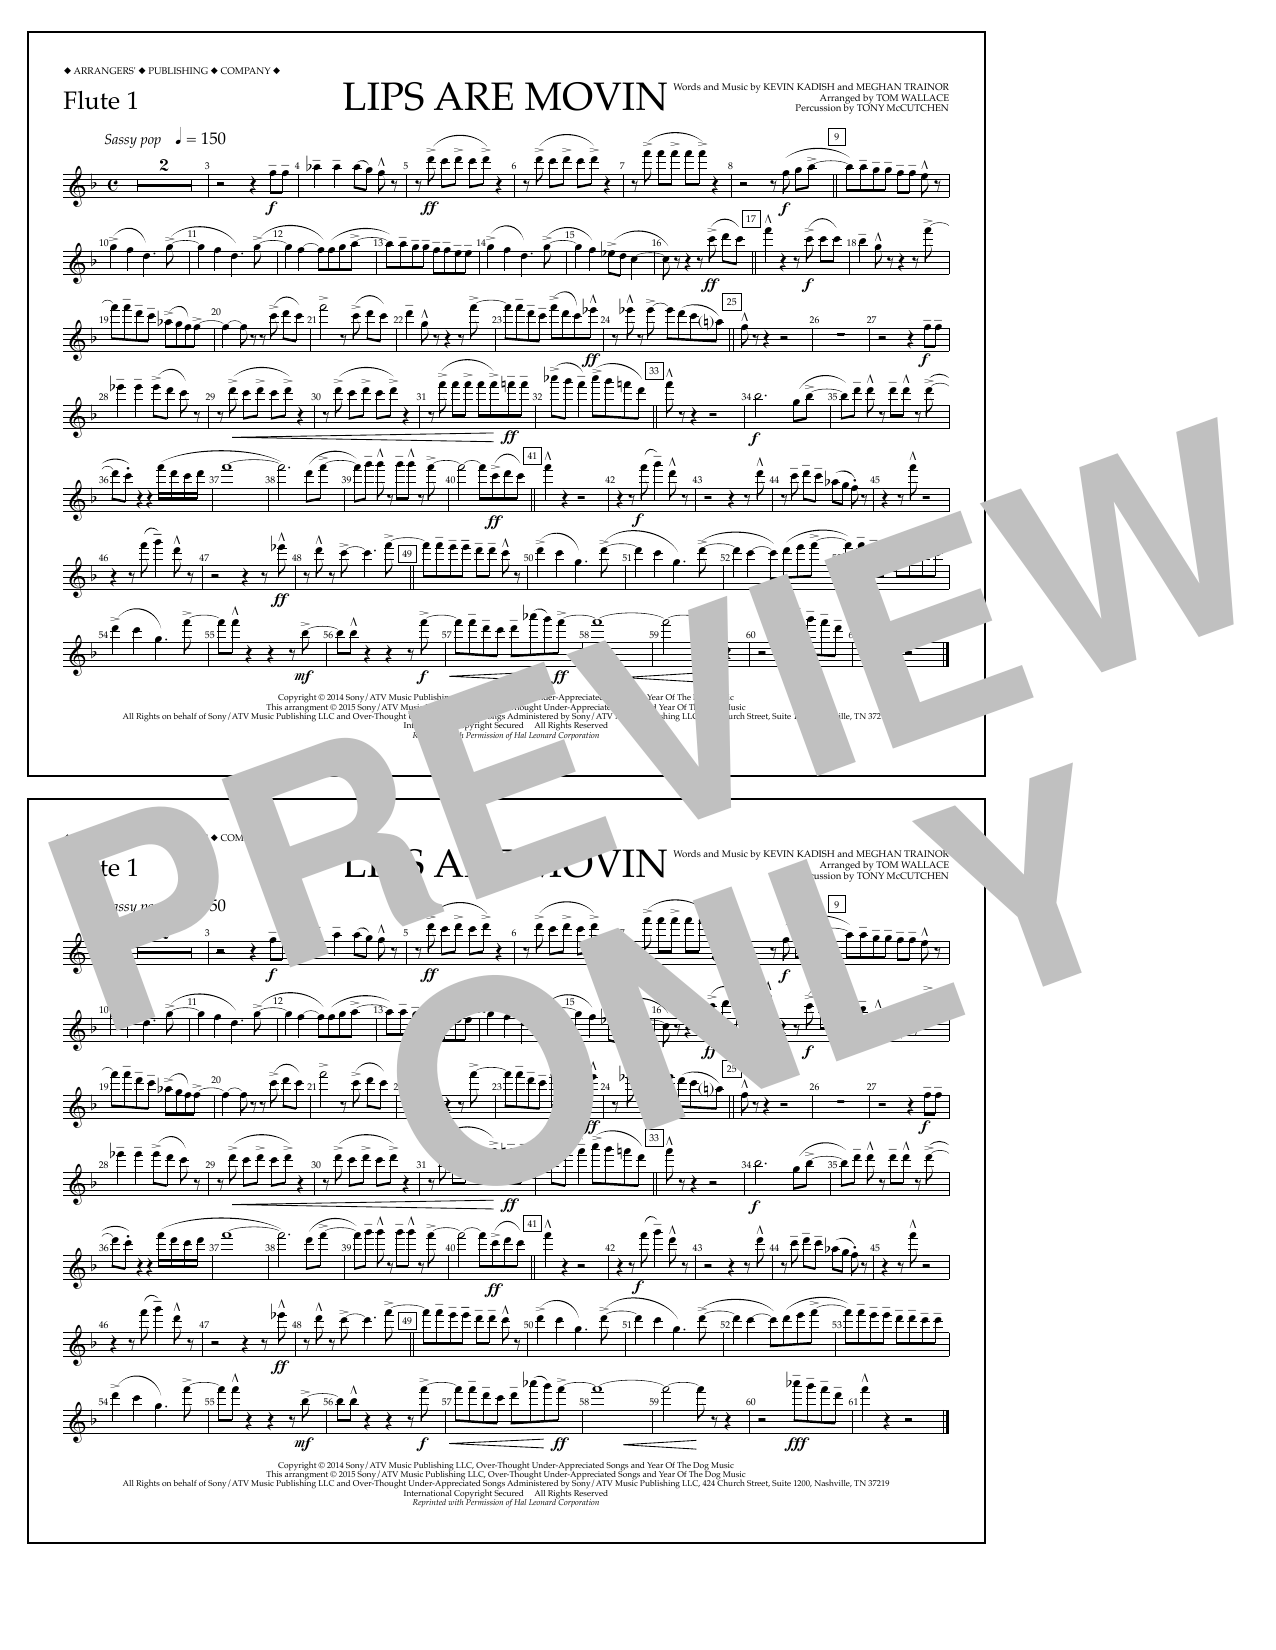 Download Tom Wallace Lips Are Movin - Flute 1 Sheet Music